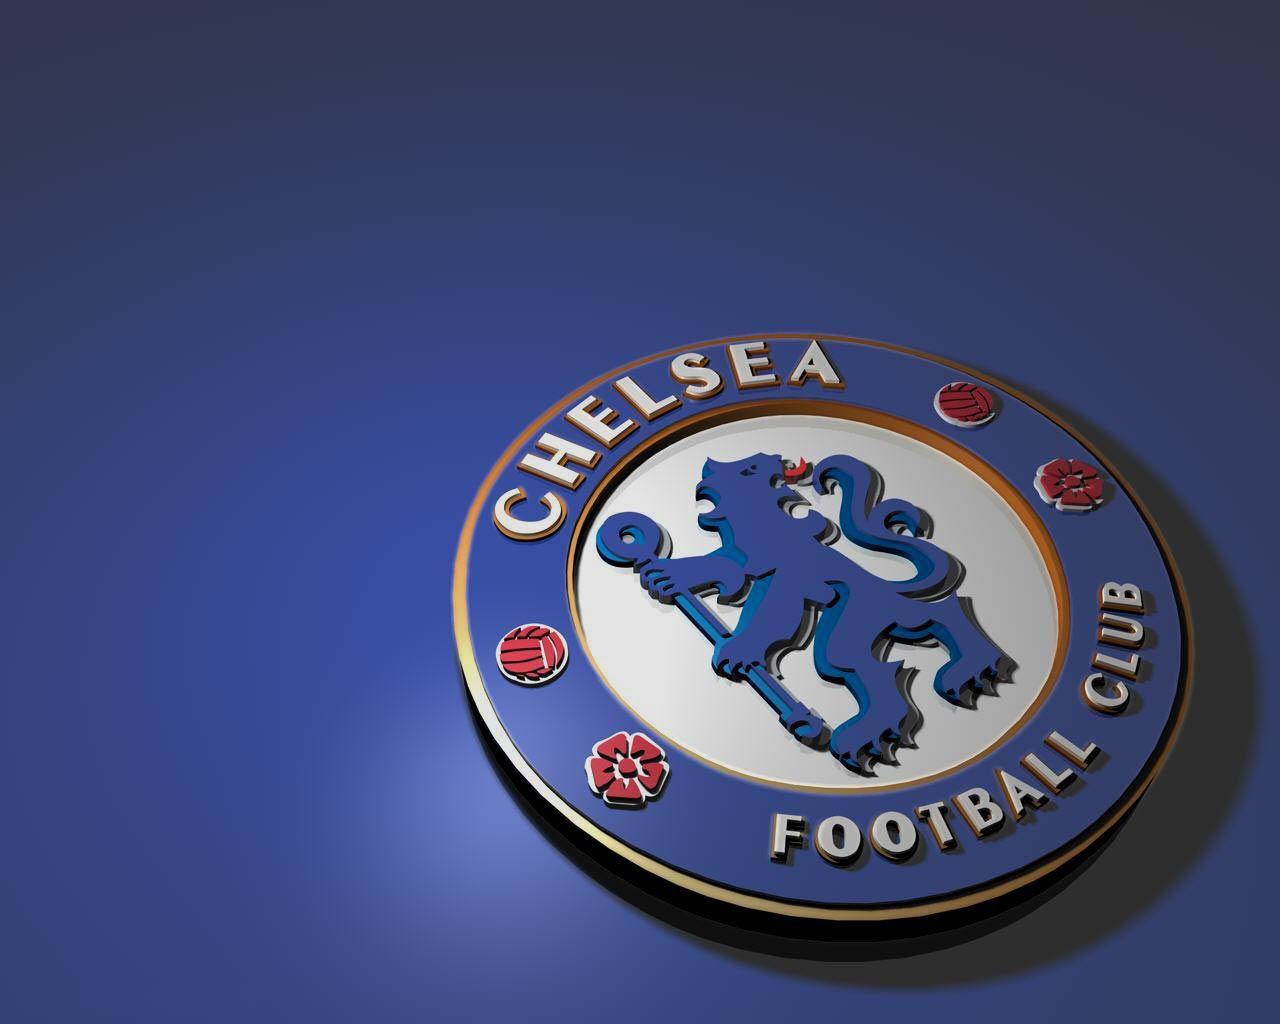 High Resolution Picture Collection of Chelsea Wallpaper. HD